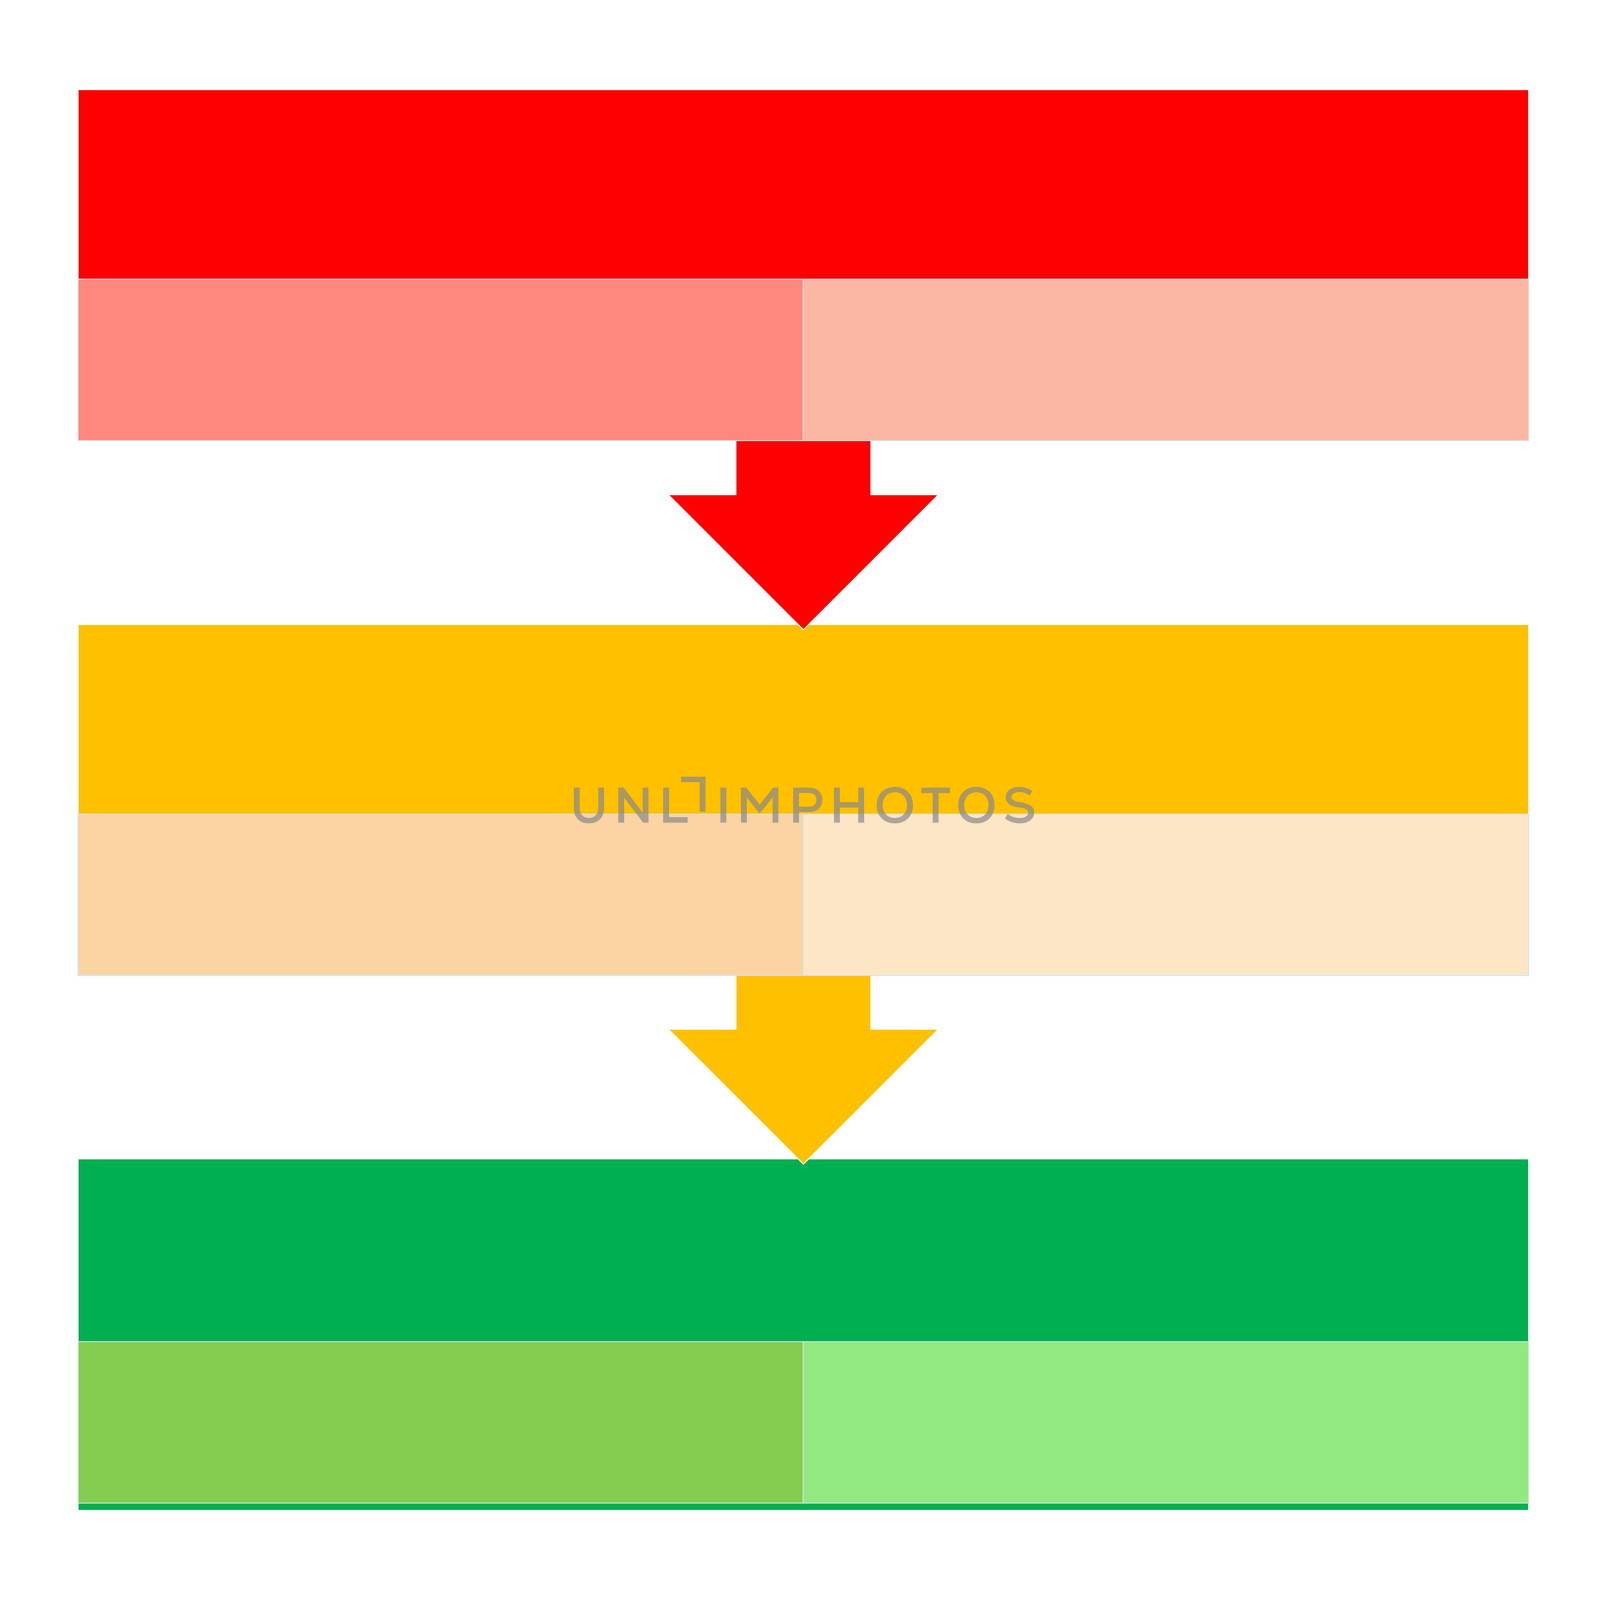 Red, orange and green shape to describe process with arrows in white background